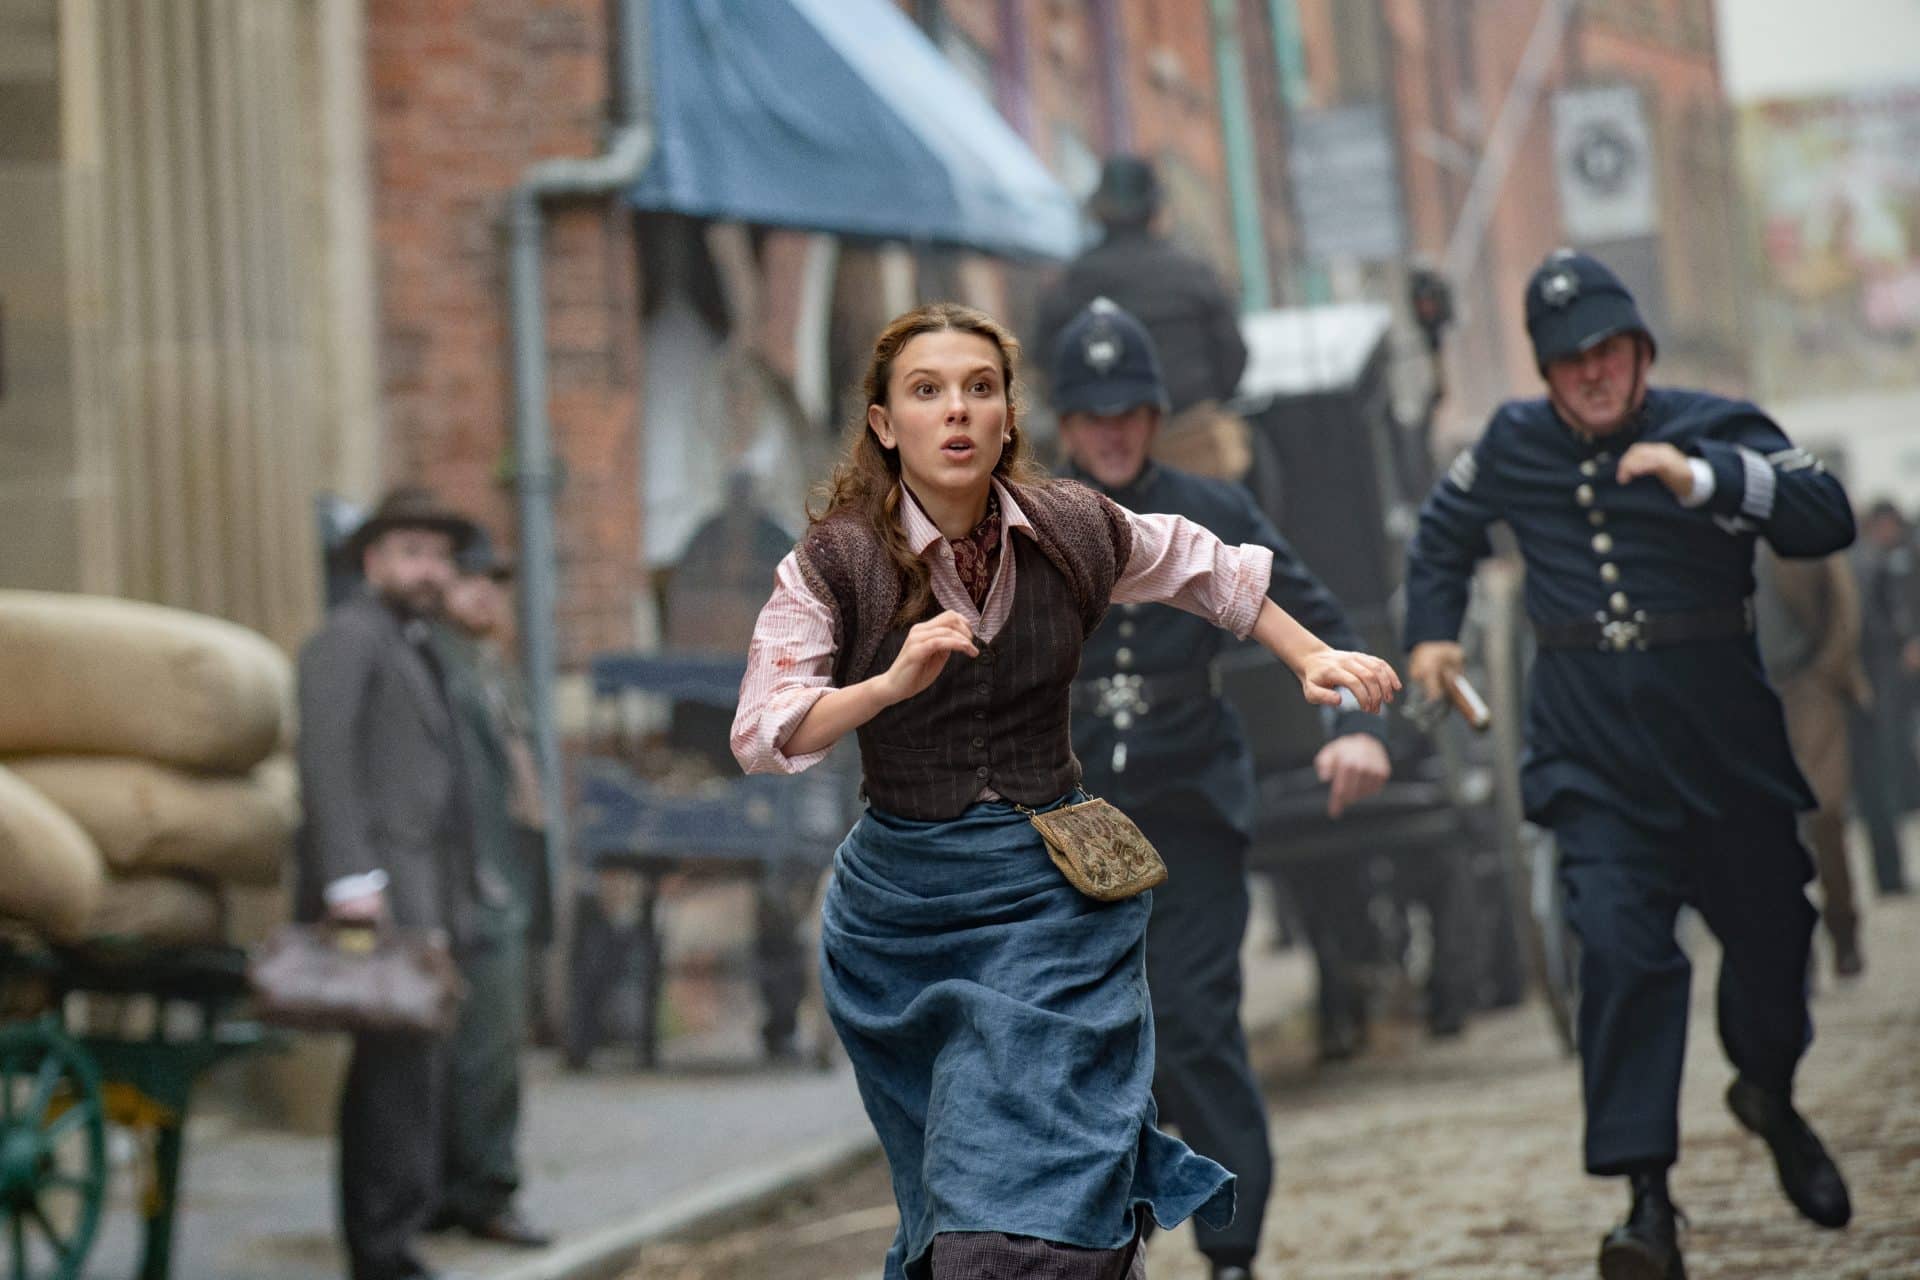 costume, daily, film and tv, scene, set, work experience, creative skills, embroidery, creative careers, BBC, ITV, costume assistant, designer, enola holmes 2, millie bobby brown, henry caville, film still, trailer